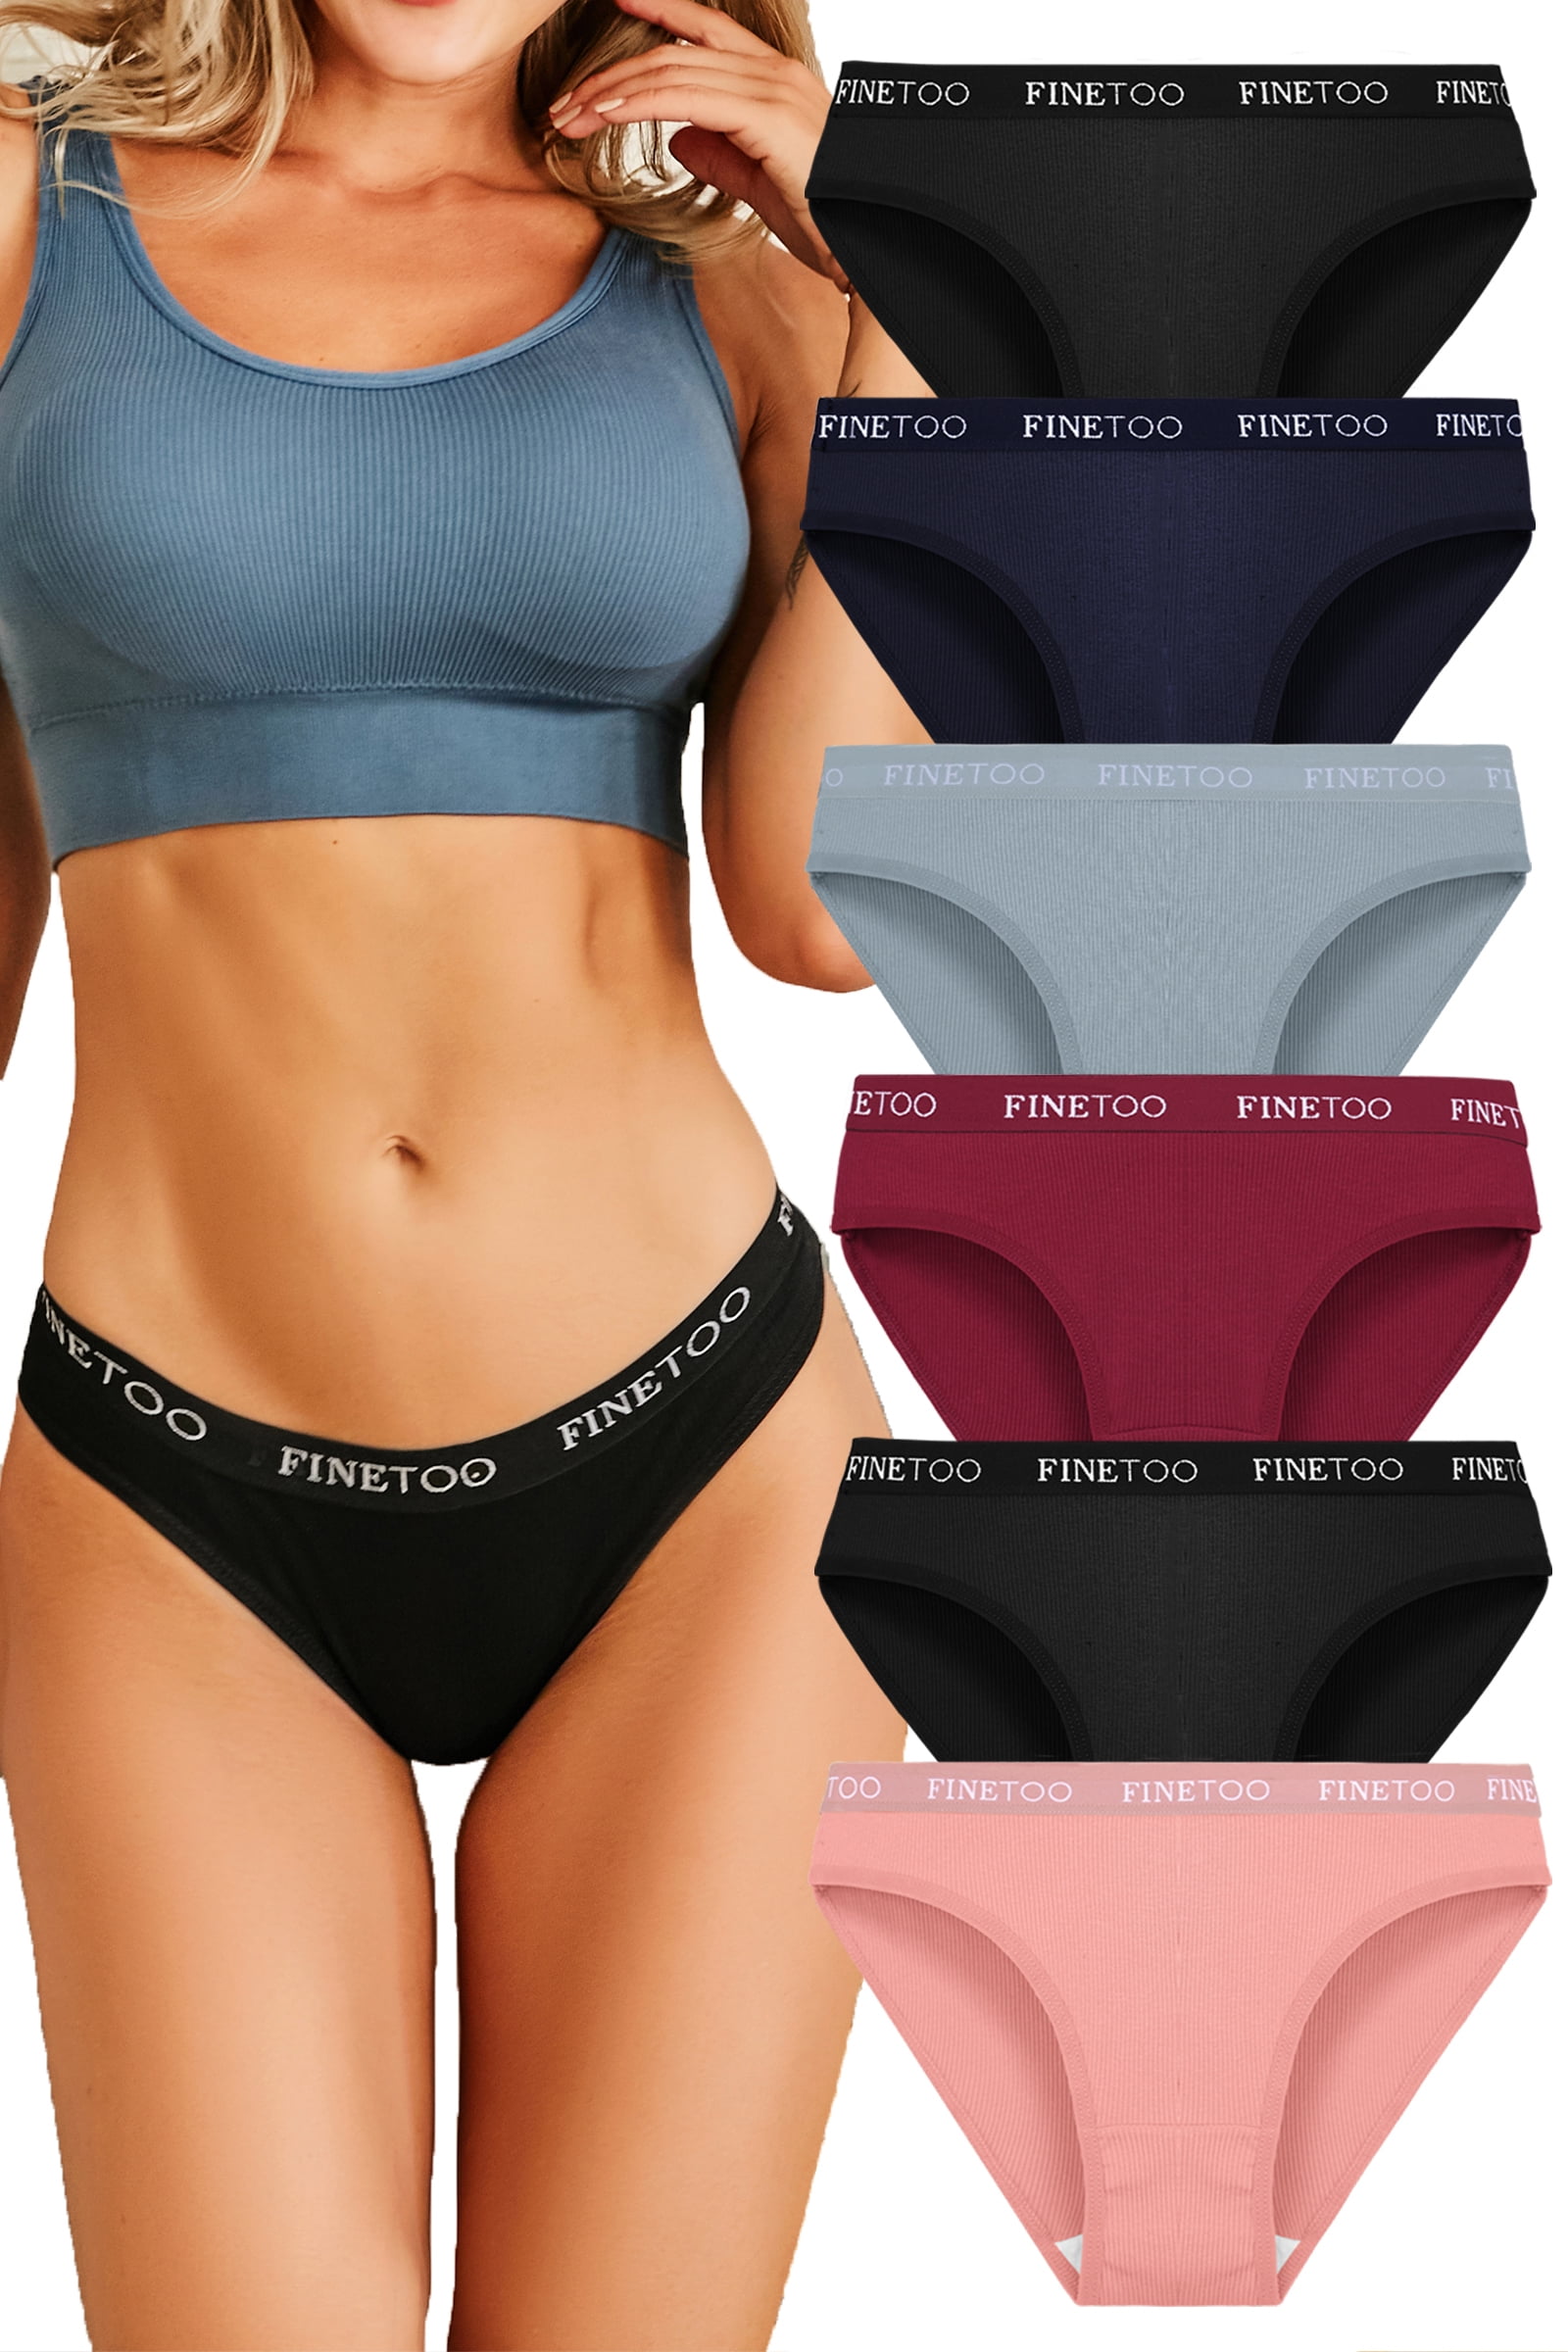 finetoo panty - Buy finetoo panty at Best Price in Malaysia